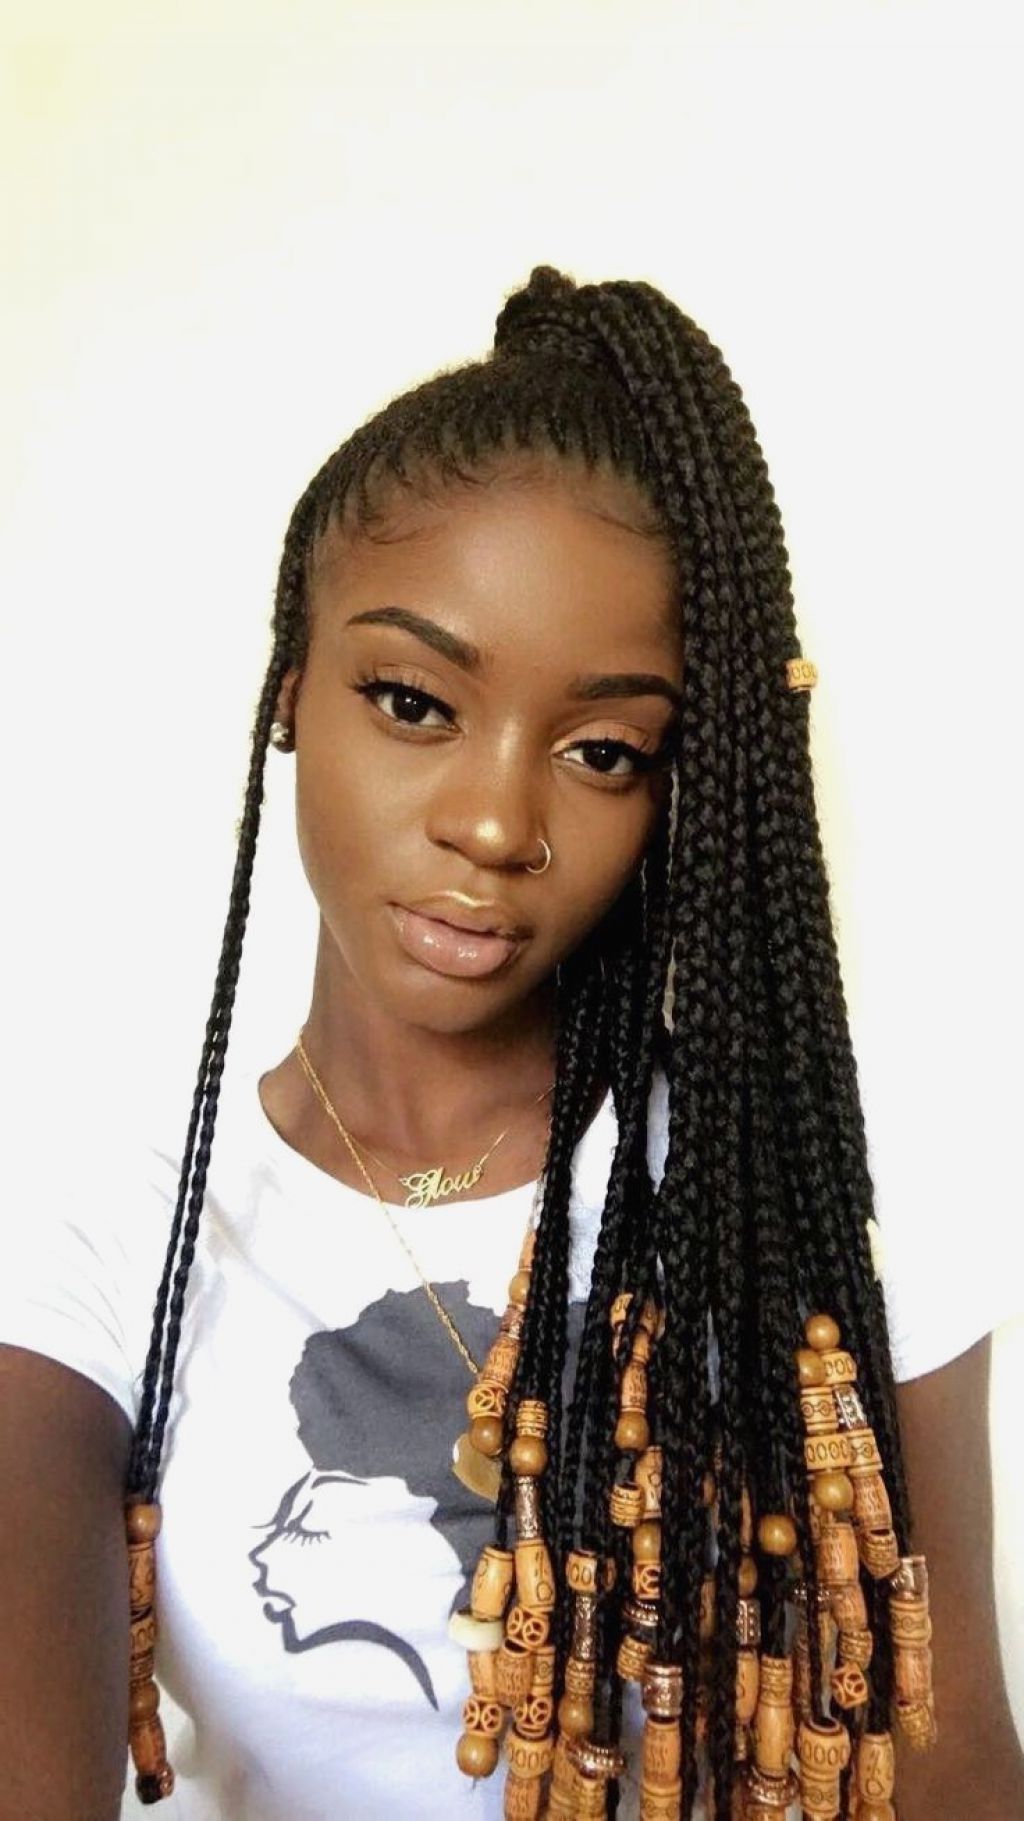 √ 24+ Lovely Cute Braided Hairstyles For Black Hair: Black Regarding Popular Braided Hairstyles For Black Hair (View 9 of 15)